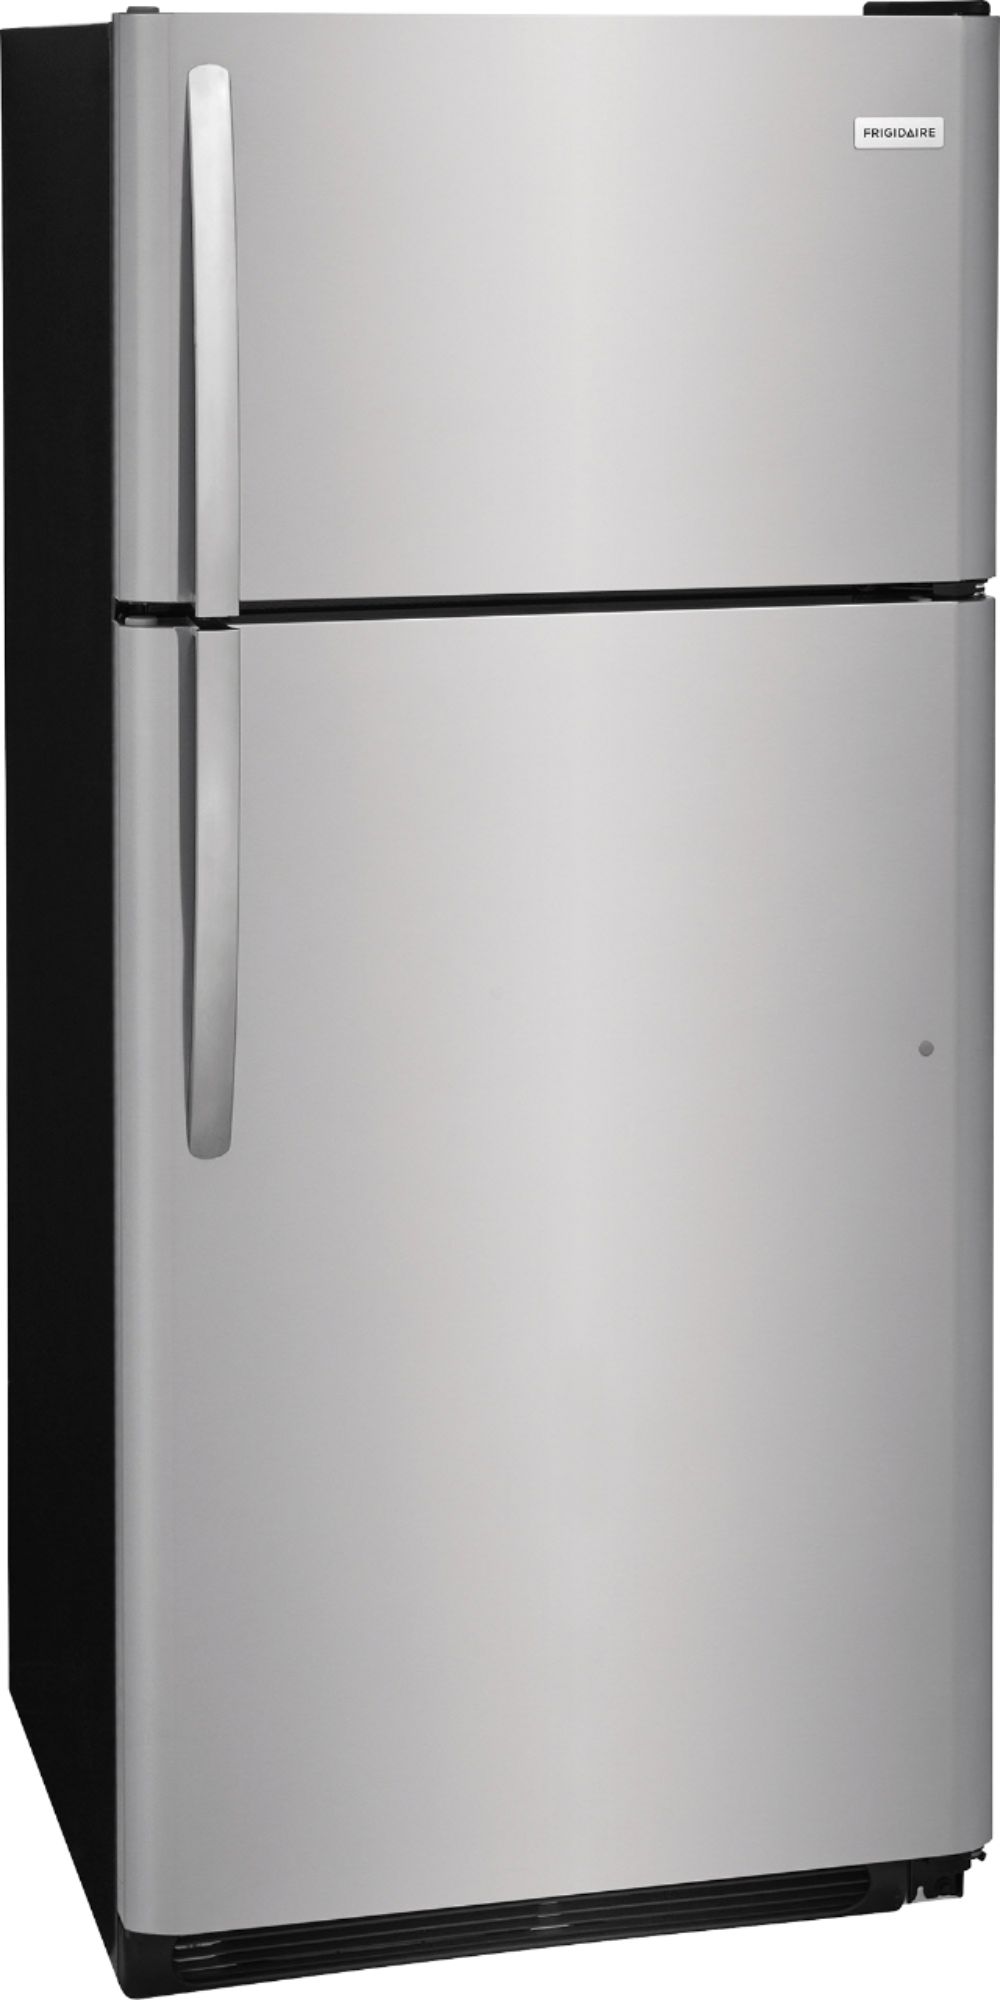 Angle View: Bertazzoni - Professional Series 13.9 Cu. Ft. Bottom-Freezer Built-In Refrigerator - Stainless steel